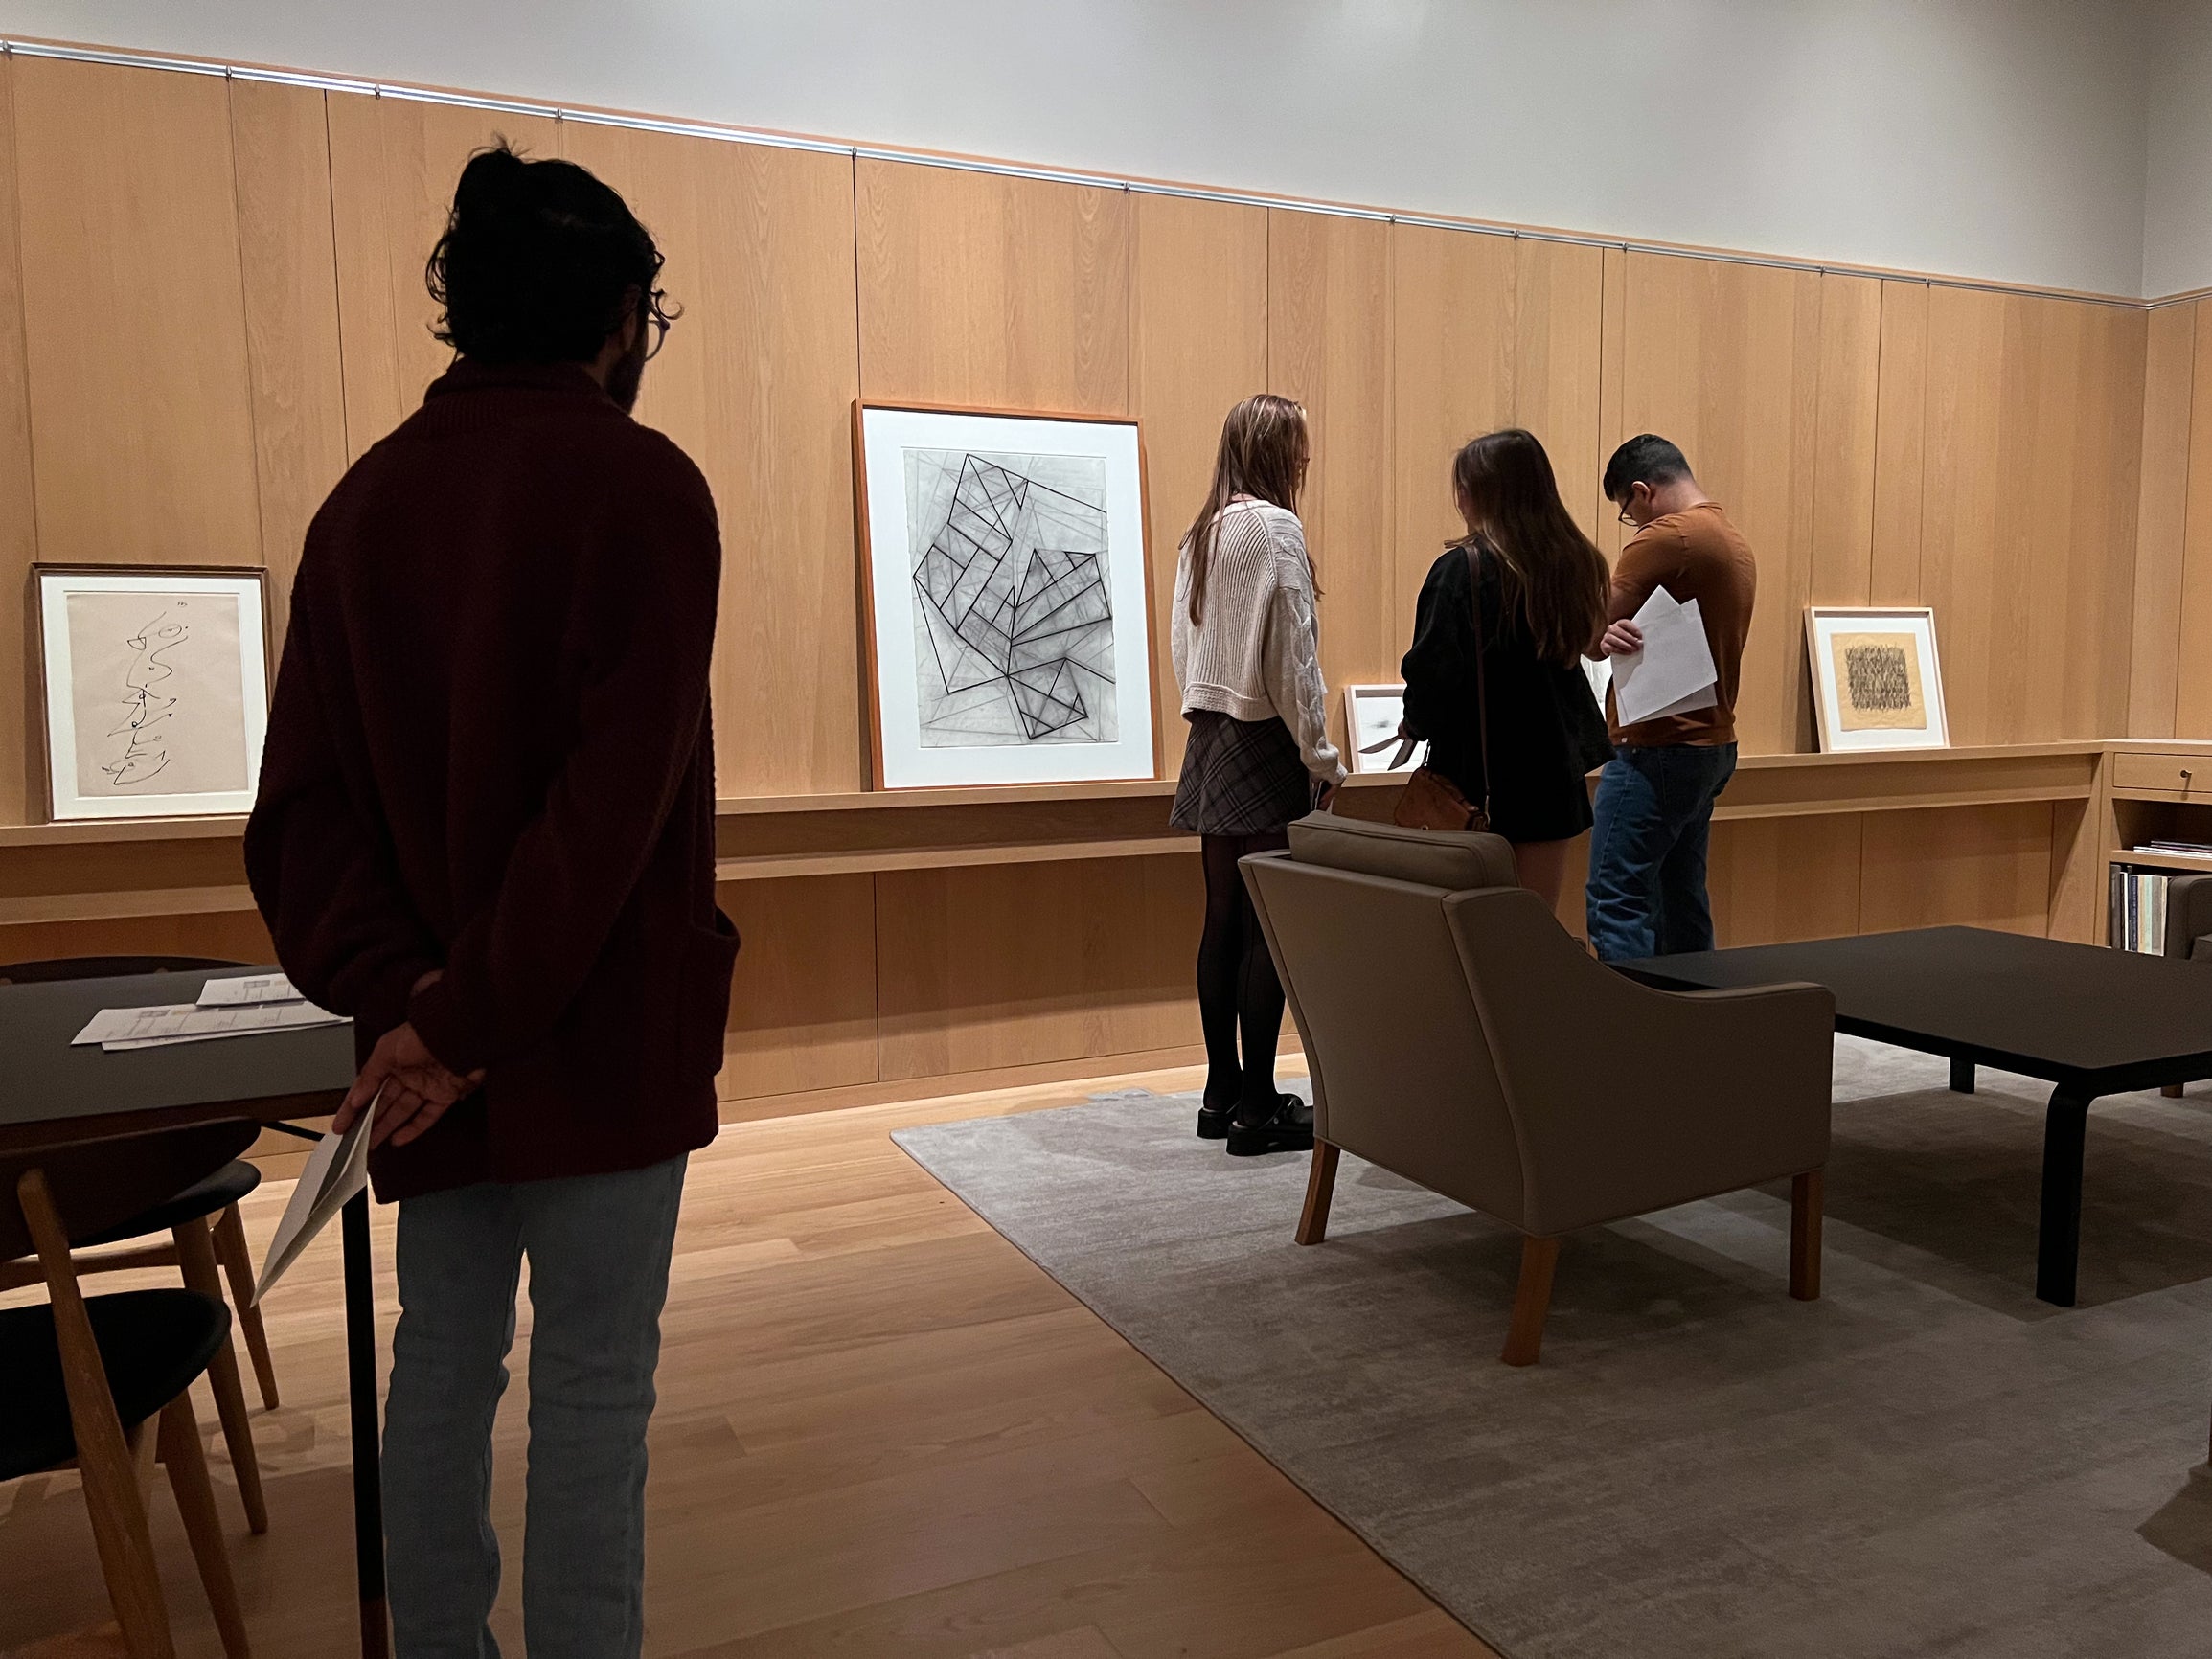 Drawing in Time exhibit